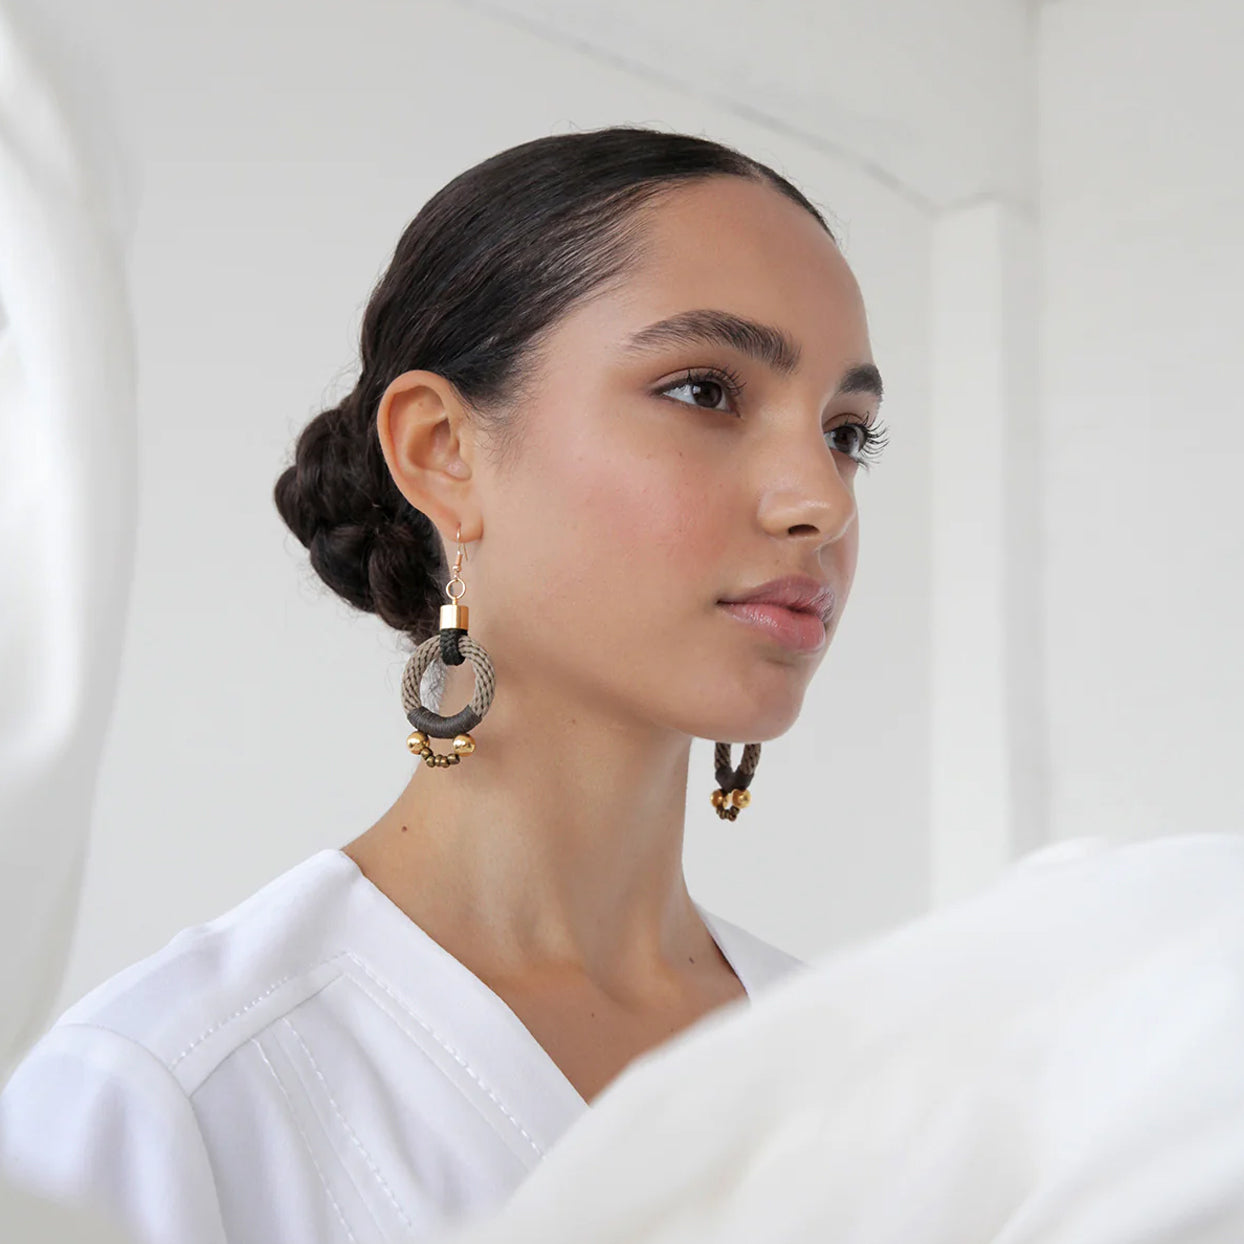 A gorgeous woman stares at herself in the mirror. She is wearing the PICHULIK Alpha Earrings with a sleek bun. The olive and beige tone looks striking against her warm skin tone.